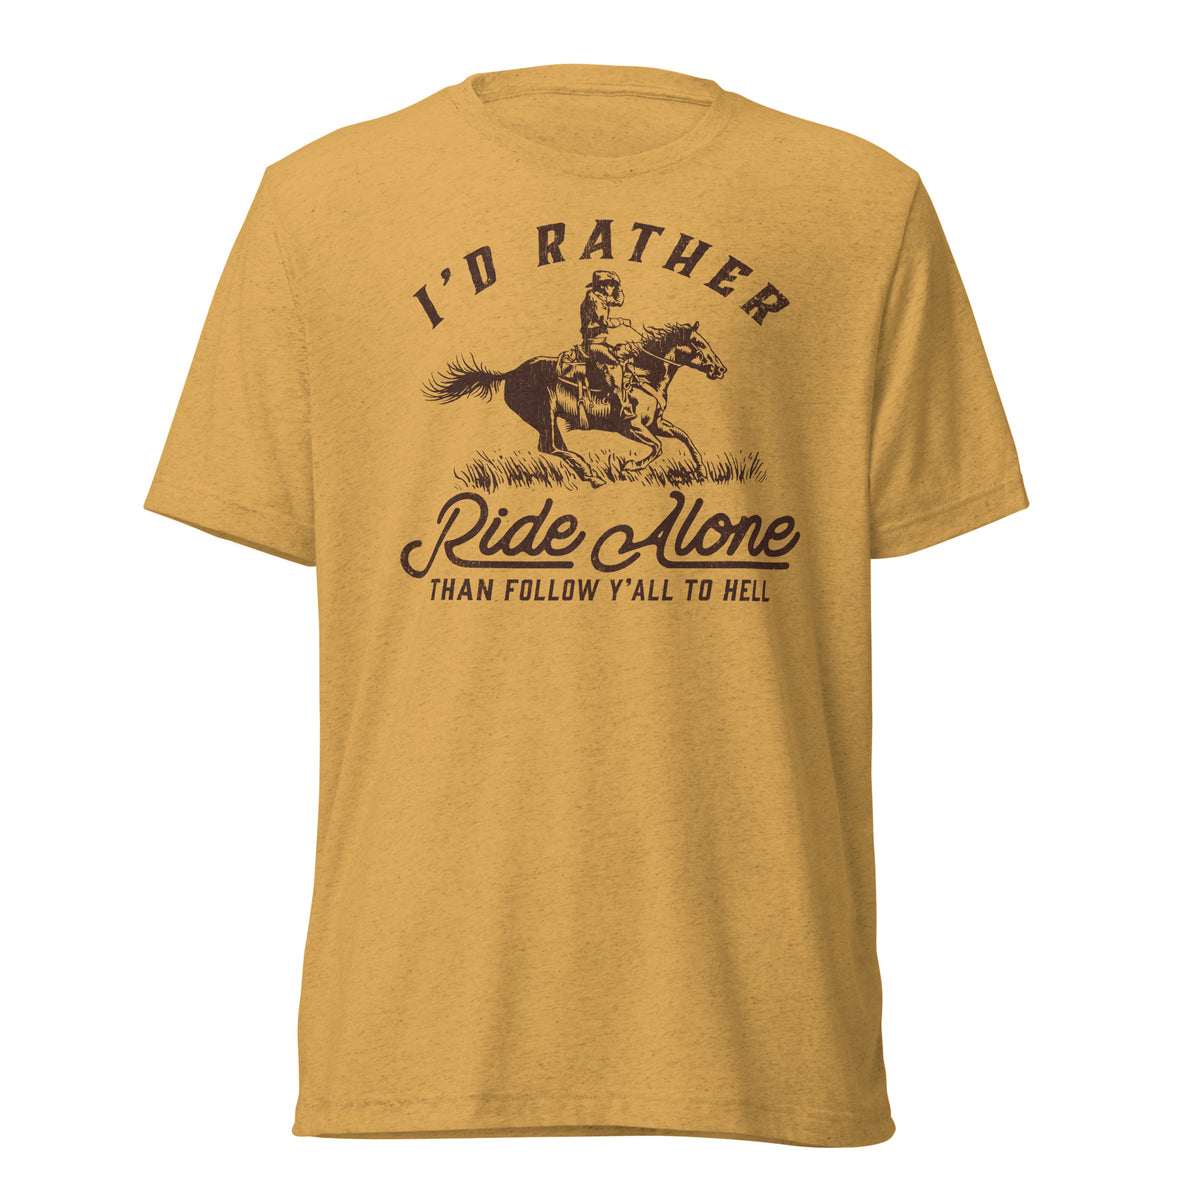 I&#39;d Rather Ride Alone Than Follow Y-All to Hell Tri-blend T-shirt